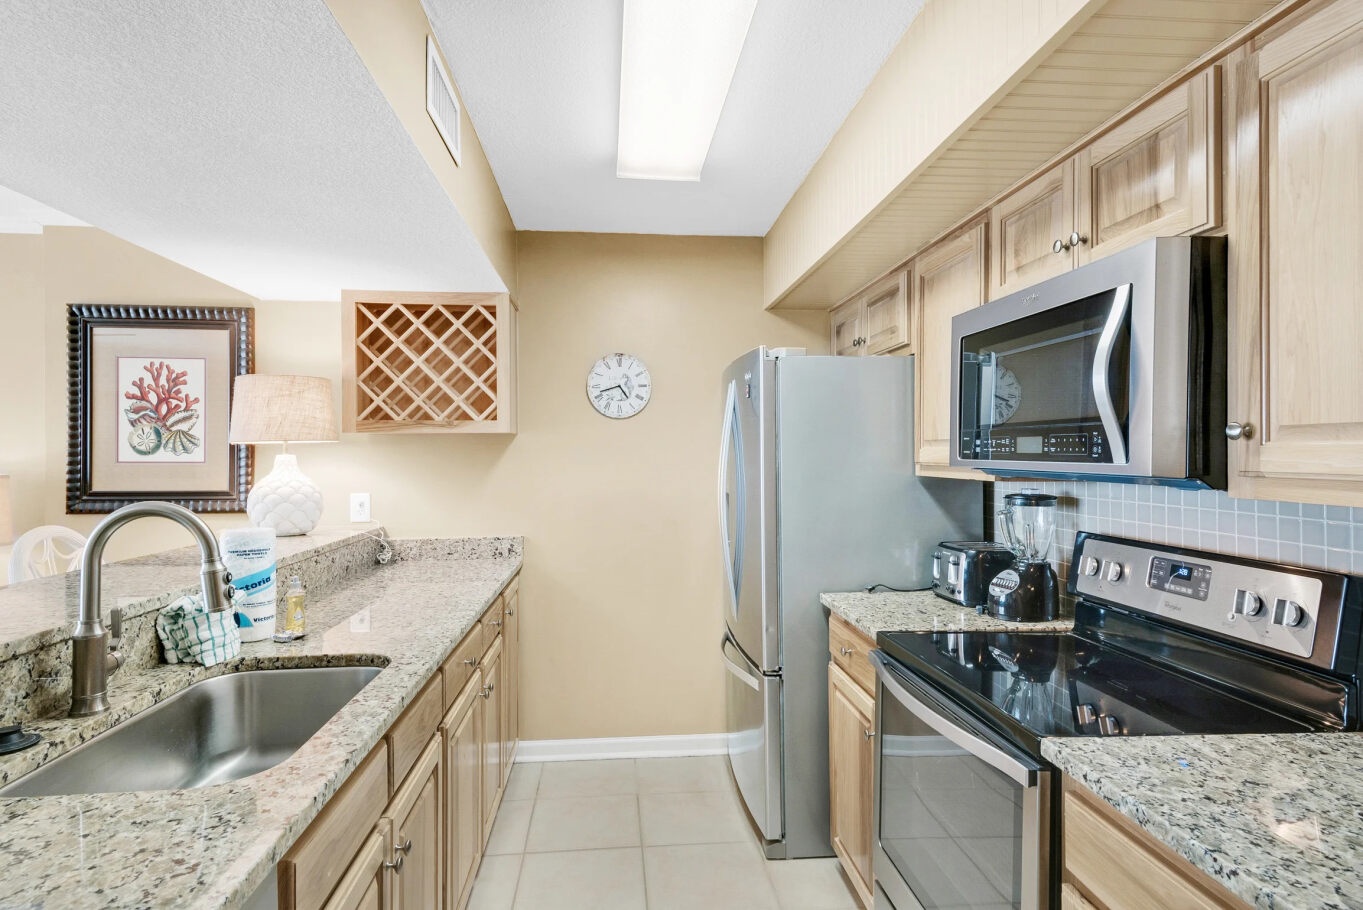 The sunny kitchen offers amply space & all the comforts of home